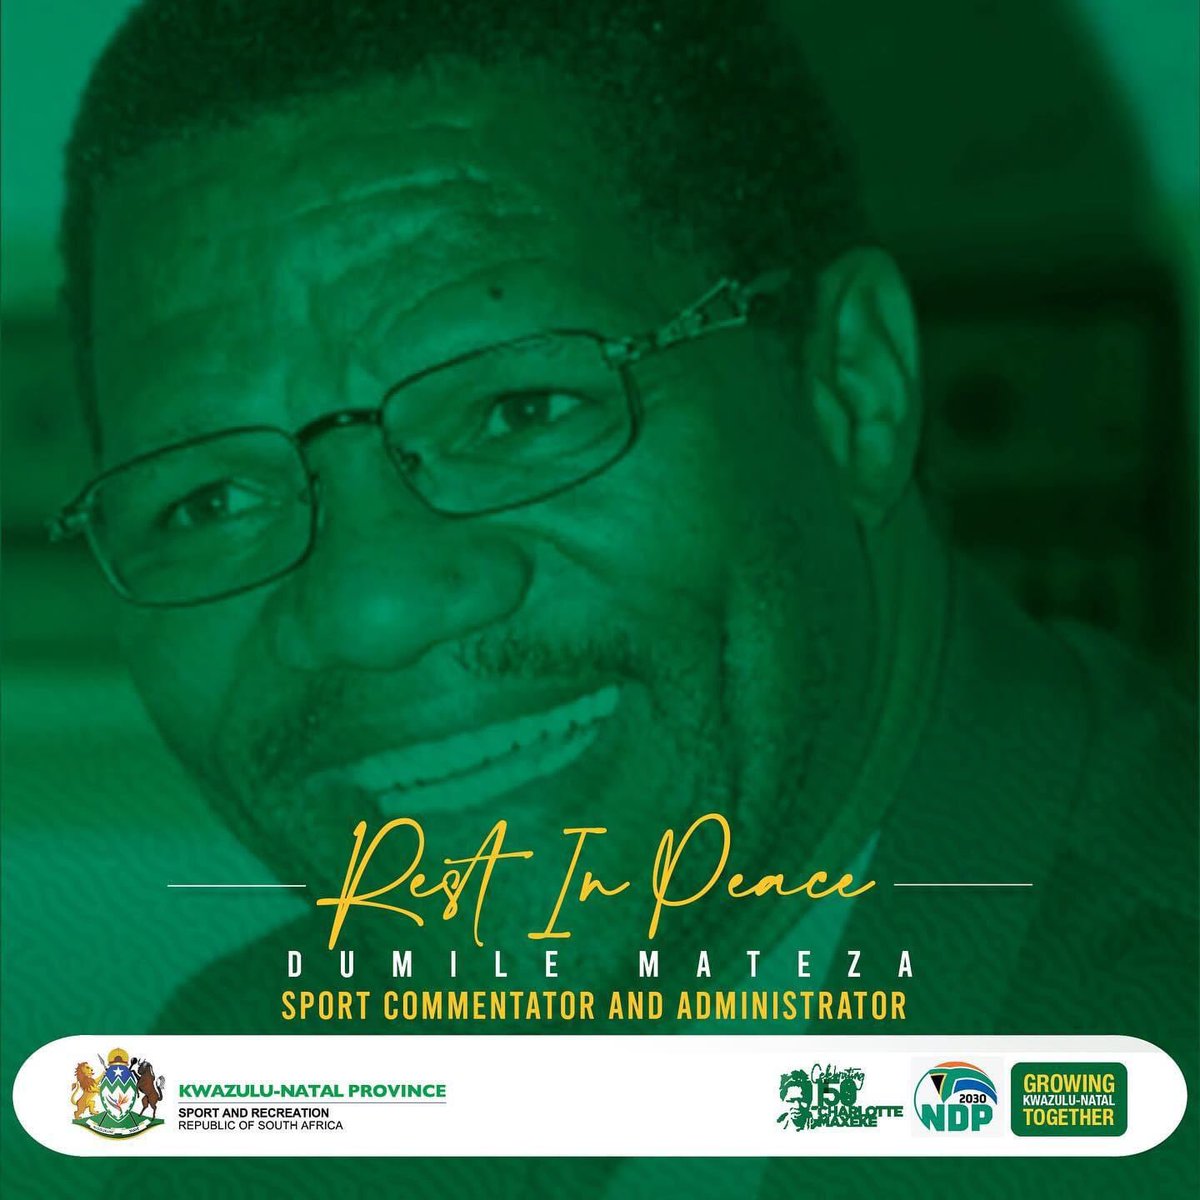 KZN BEMOURNS DUMILE MATEZA’S PASSING Sport and Recreation KZN joins the many South Africans and distant people in mourning the passing of veteran sport commentator and administrator Mr Dumile Mateza.